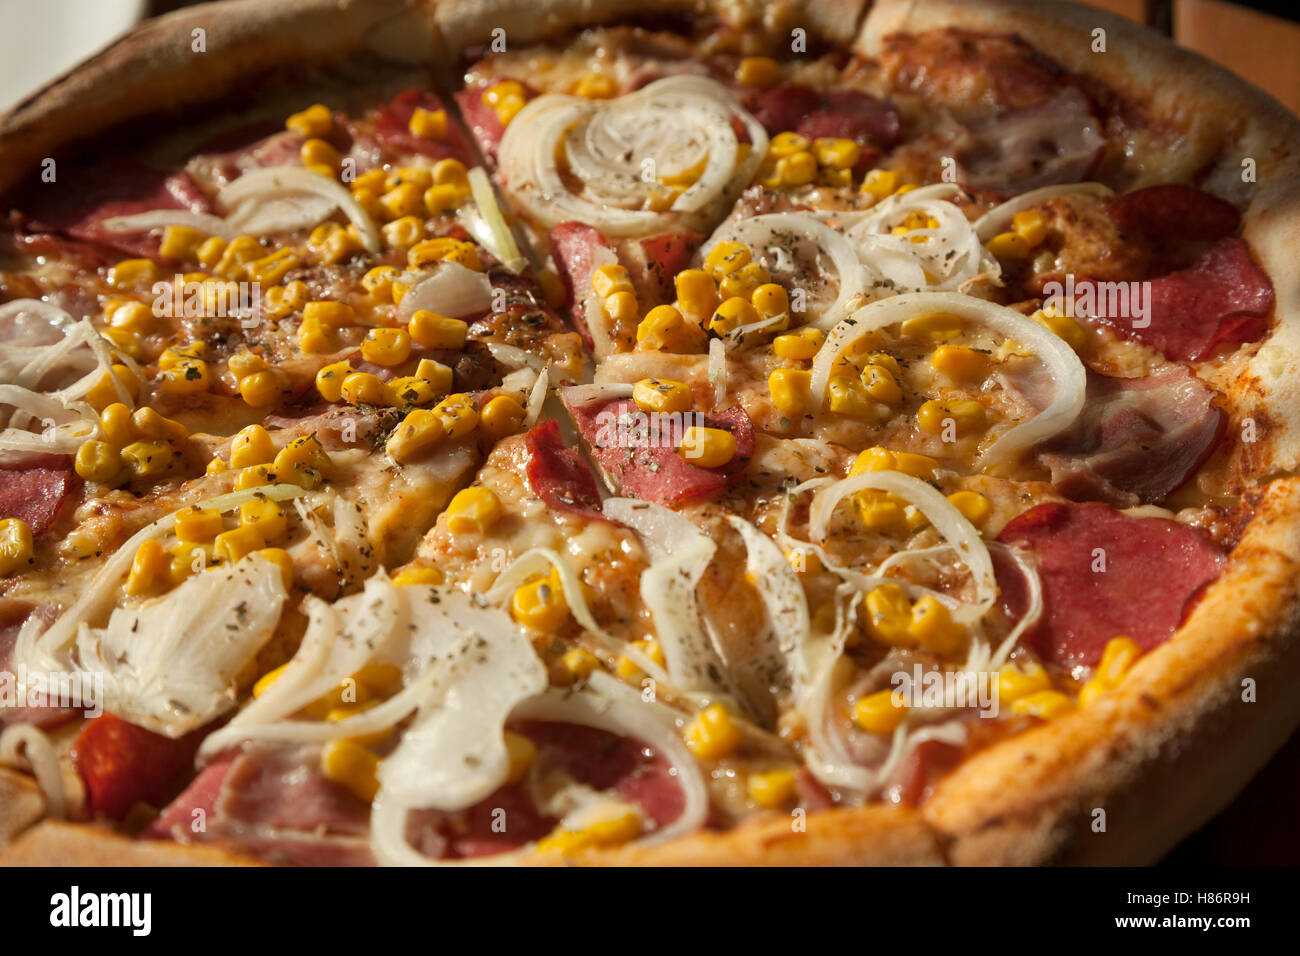 big pizza with meat and vegetables on table Stock Photo